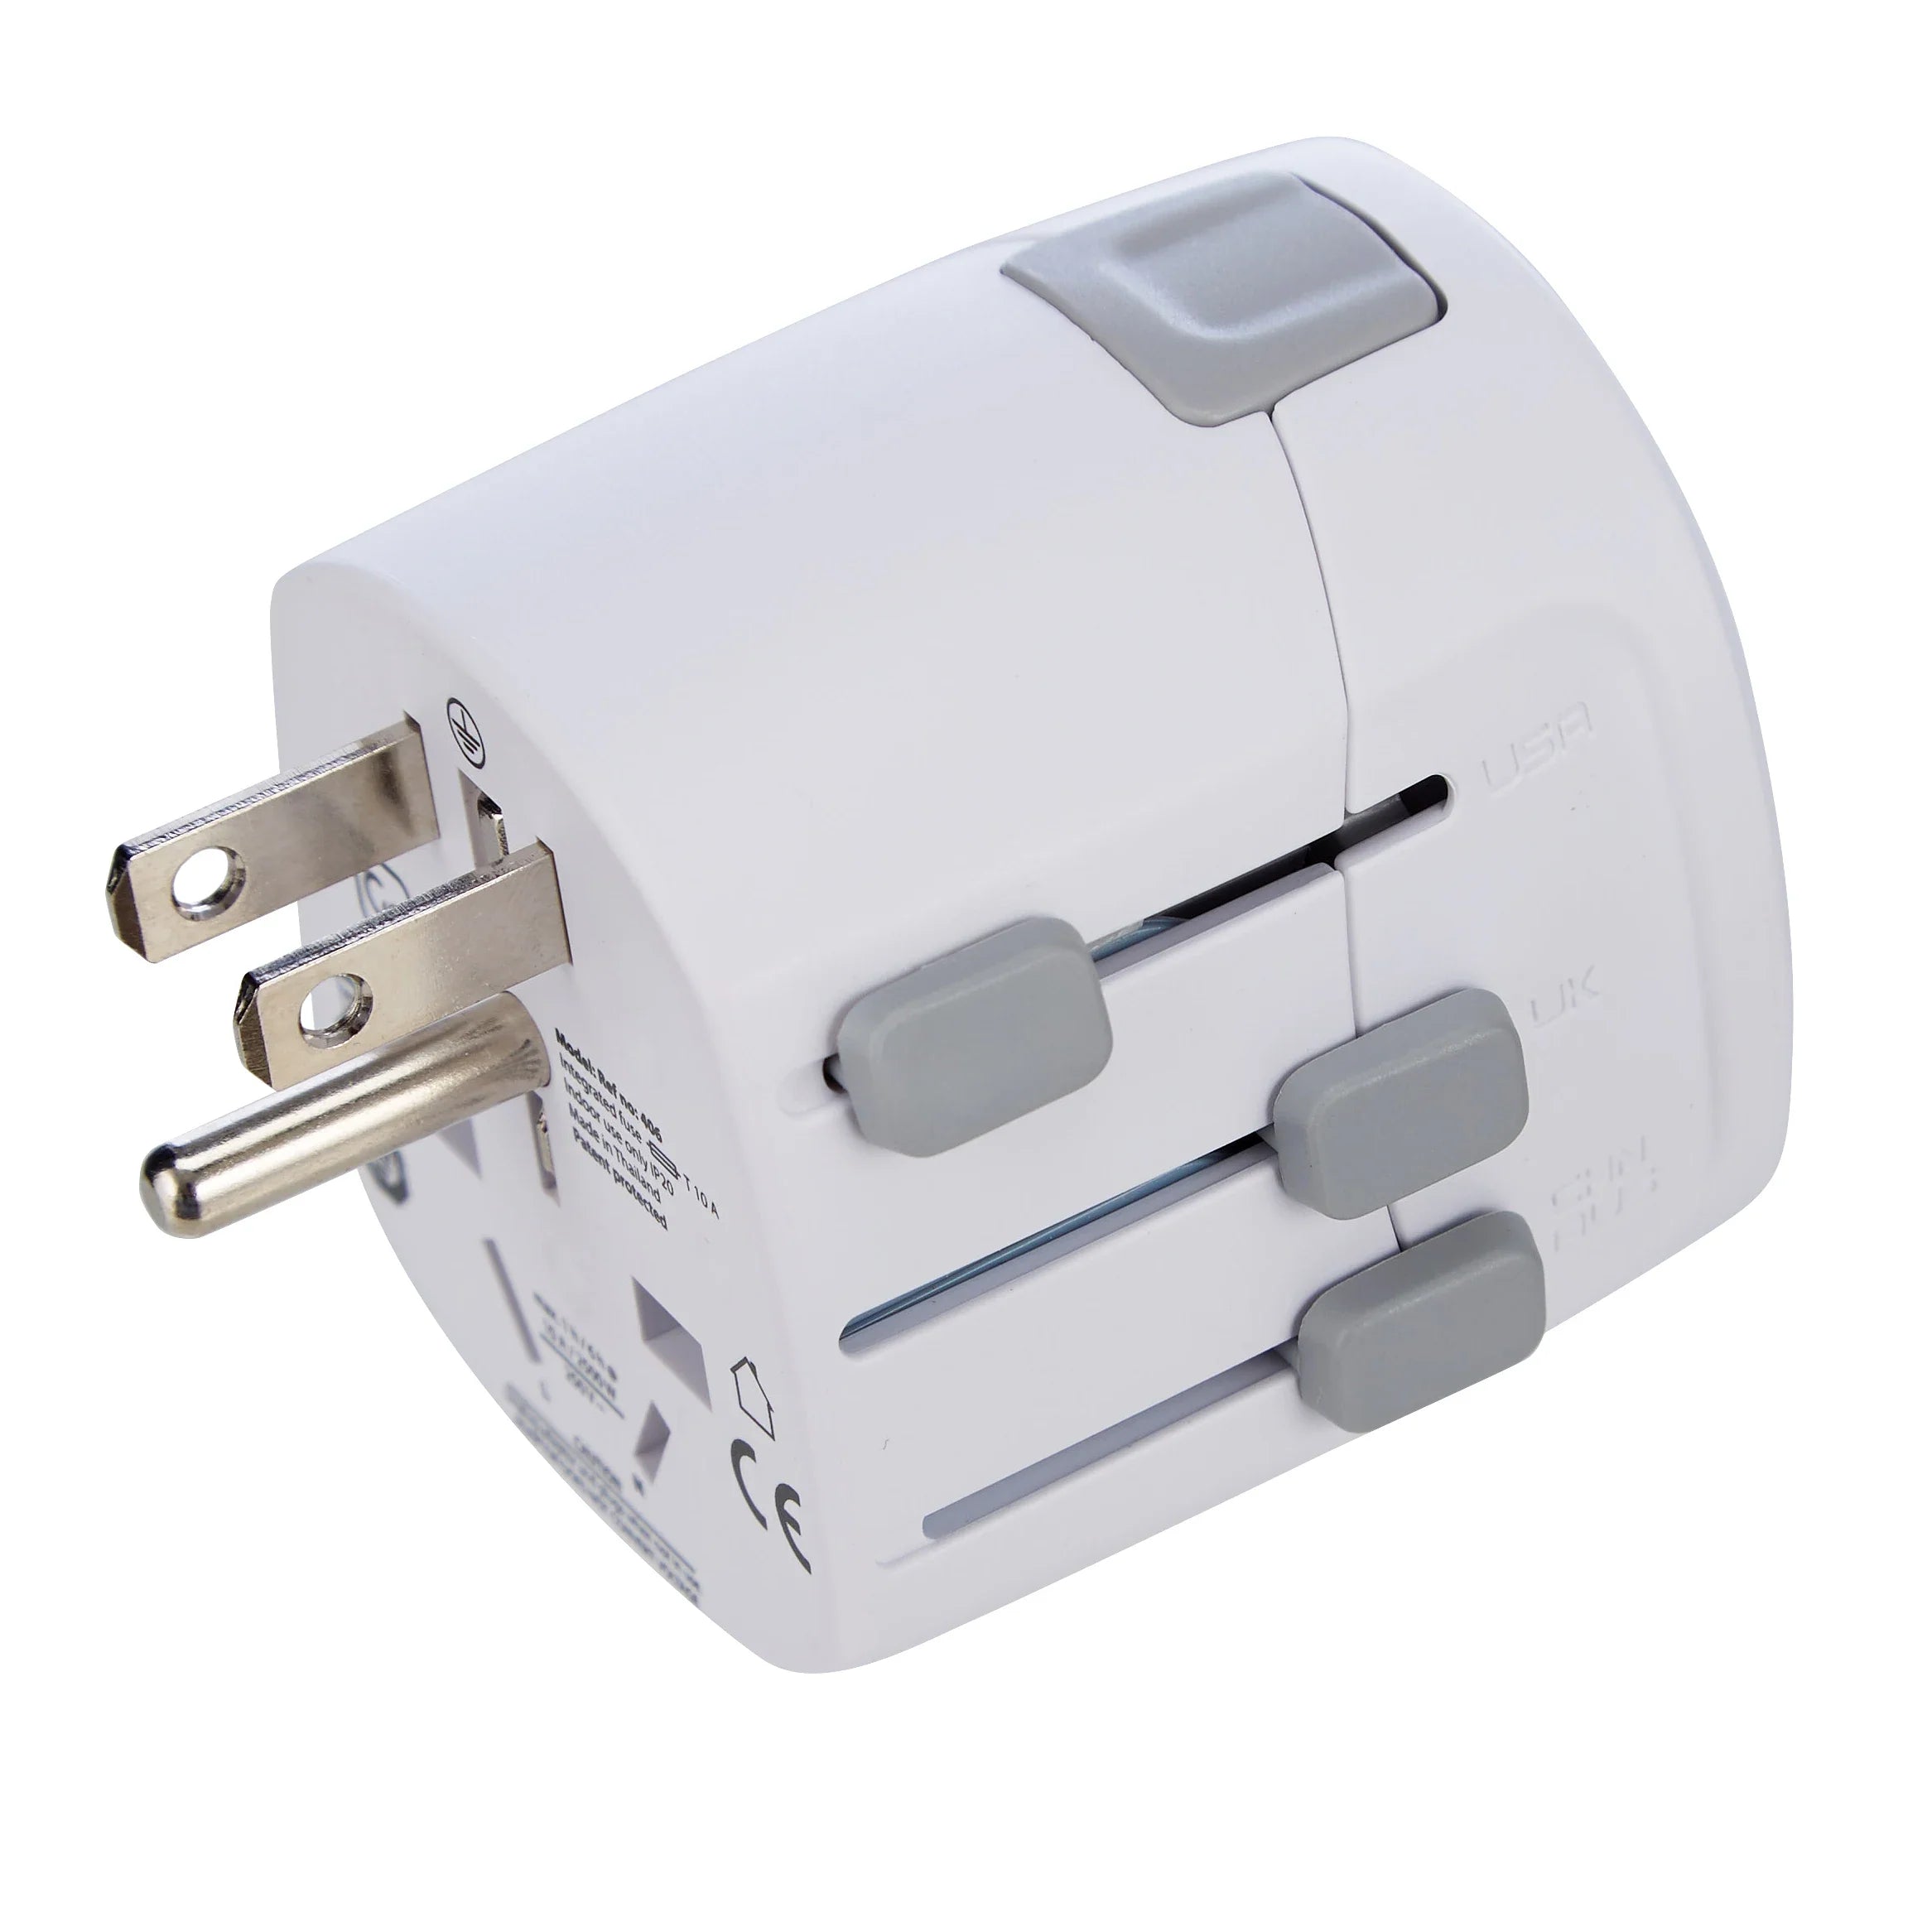 Design Go travel accessories Earthed universal adapter - white